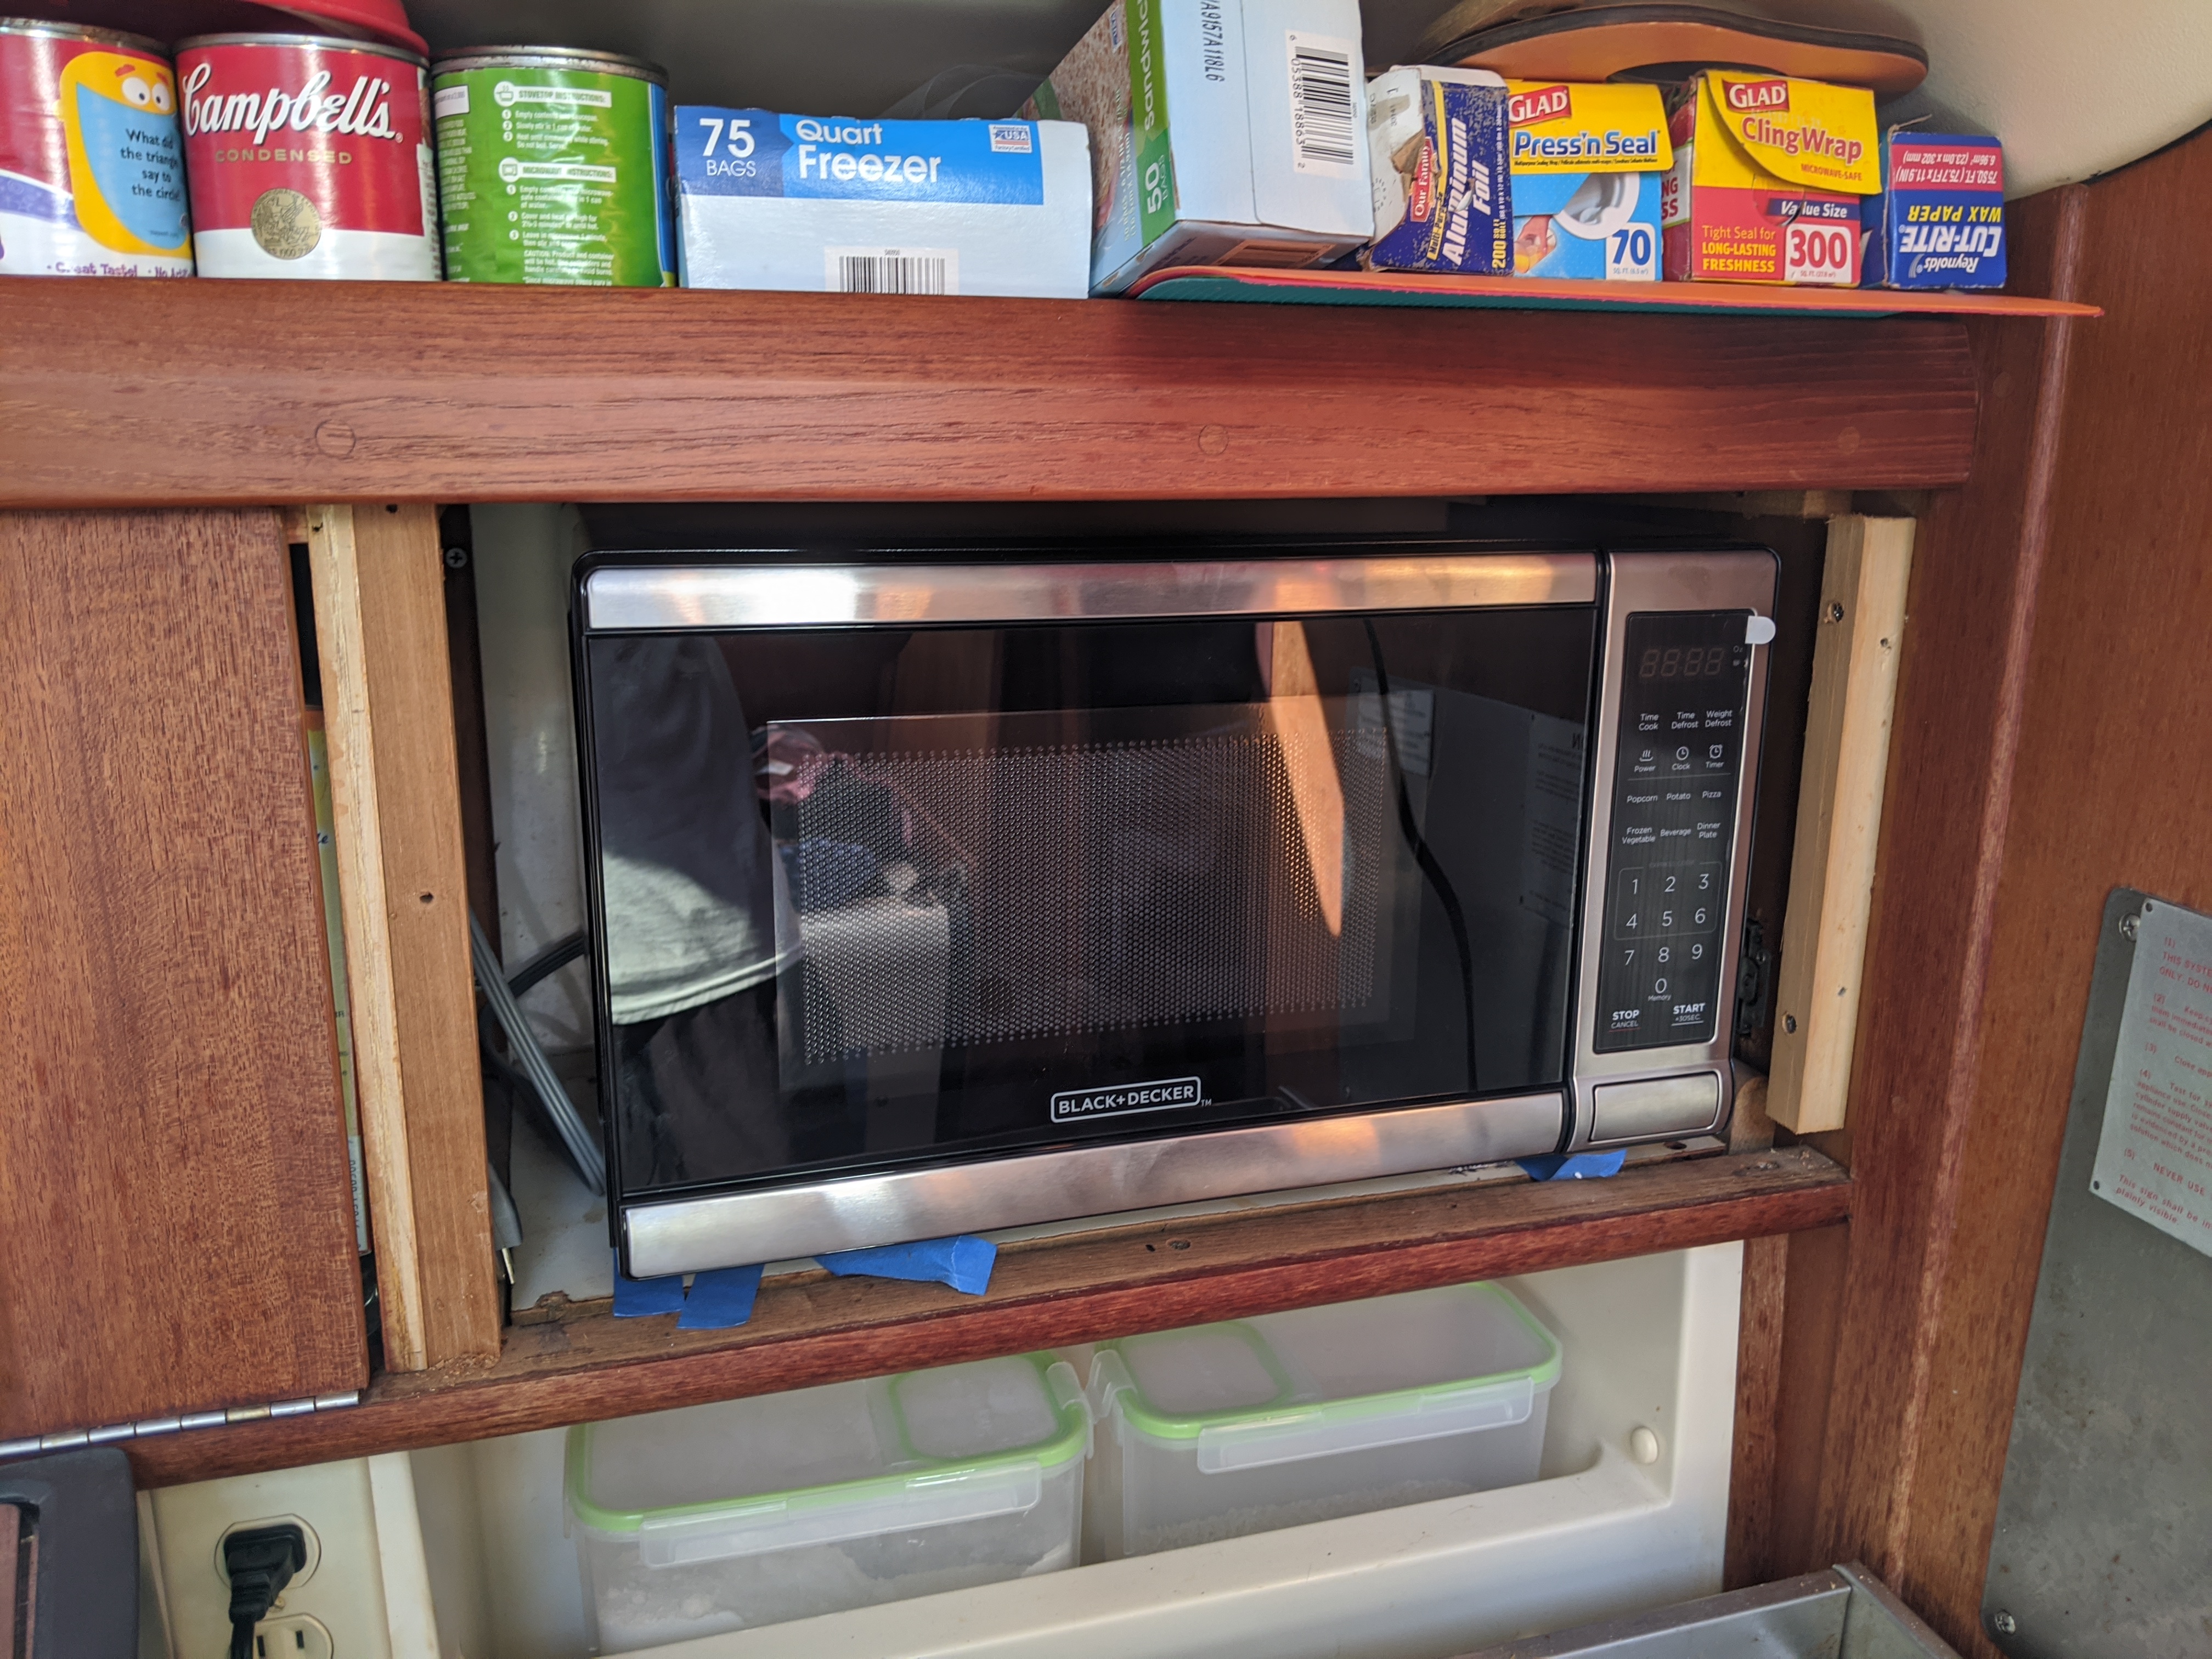 New microwave in place